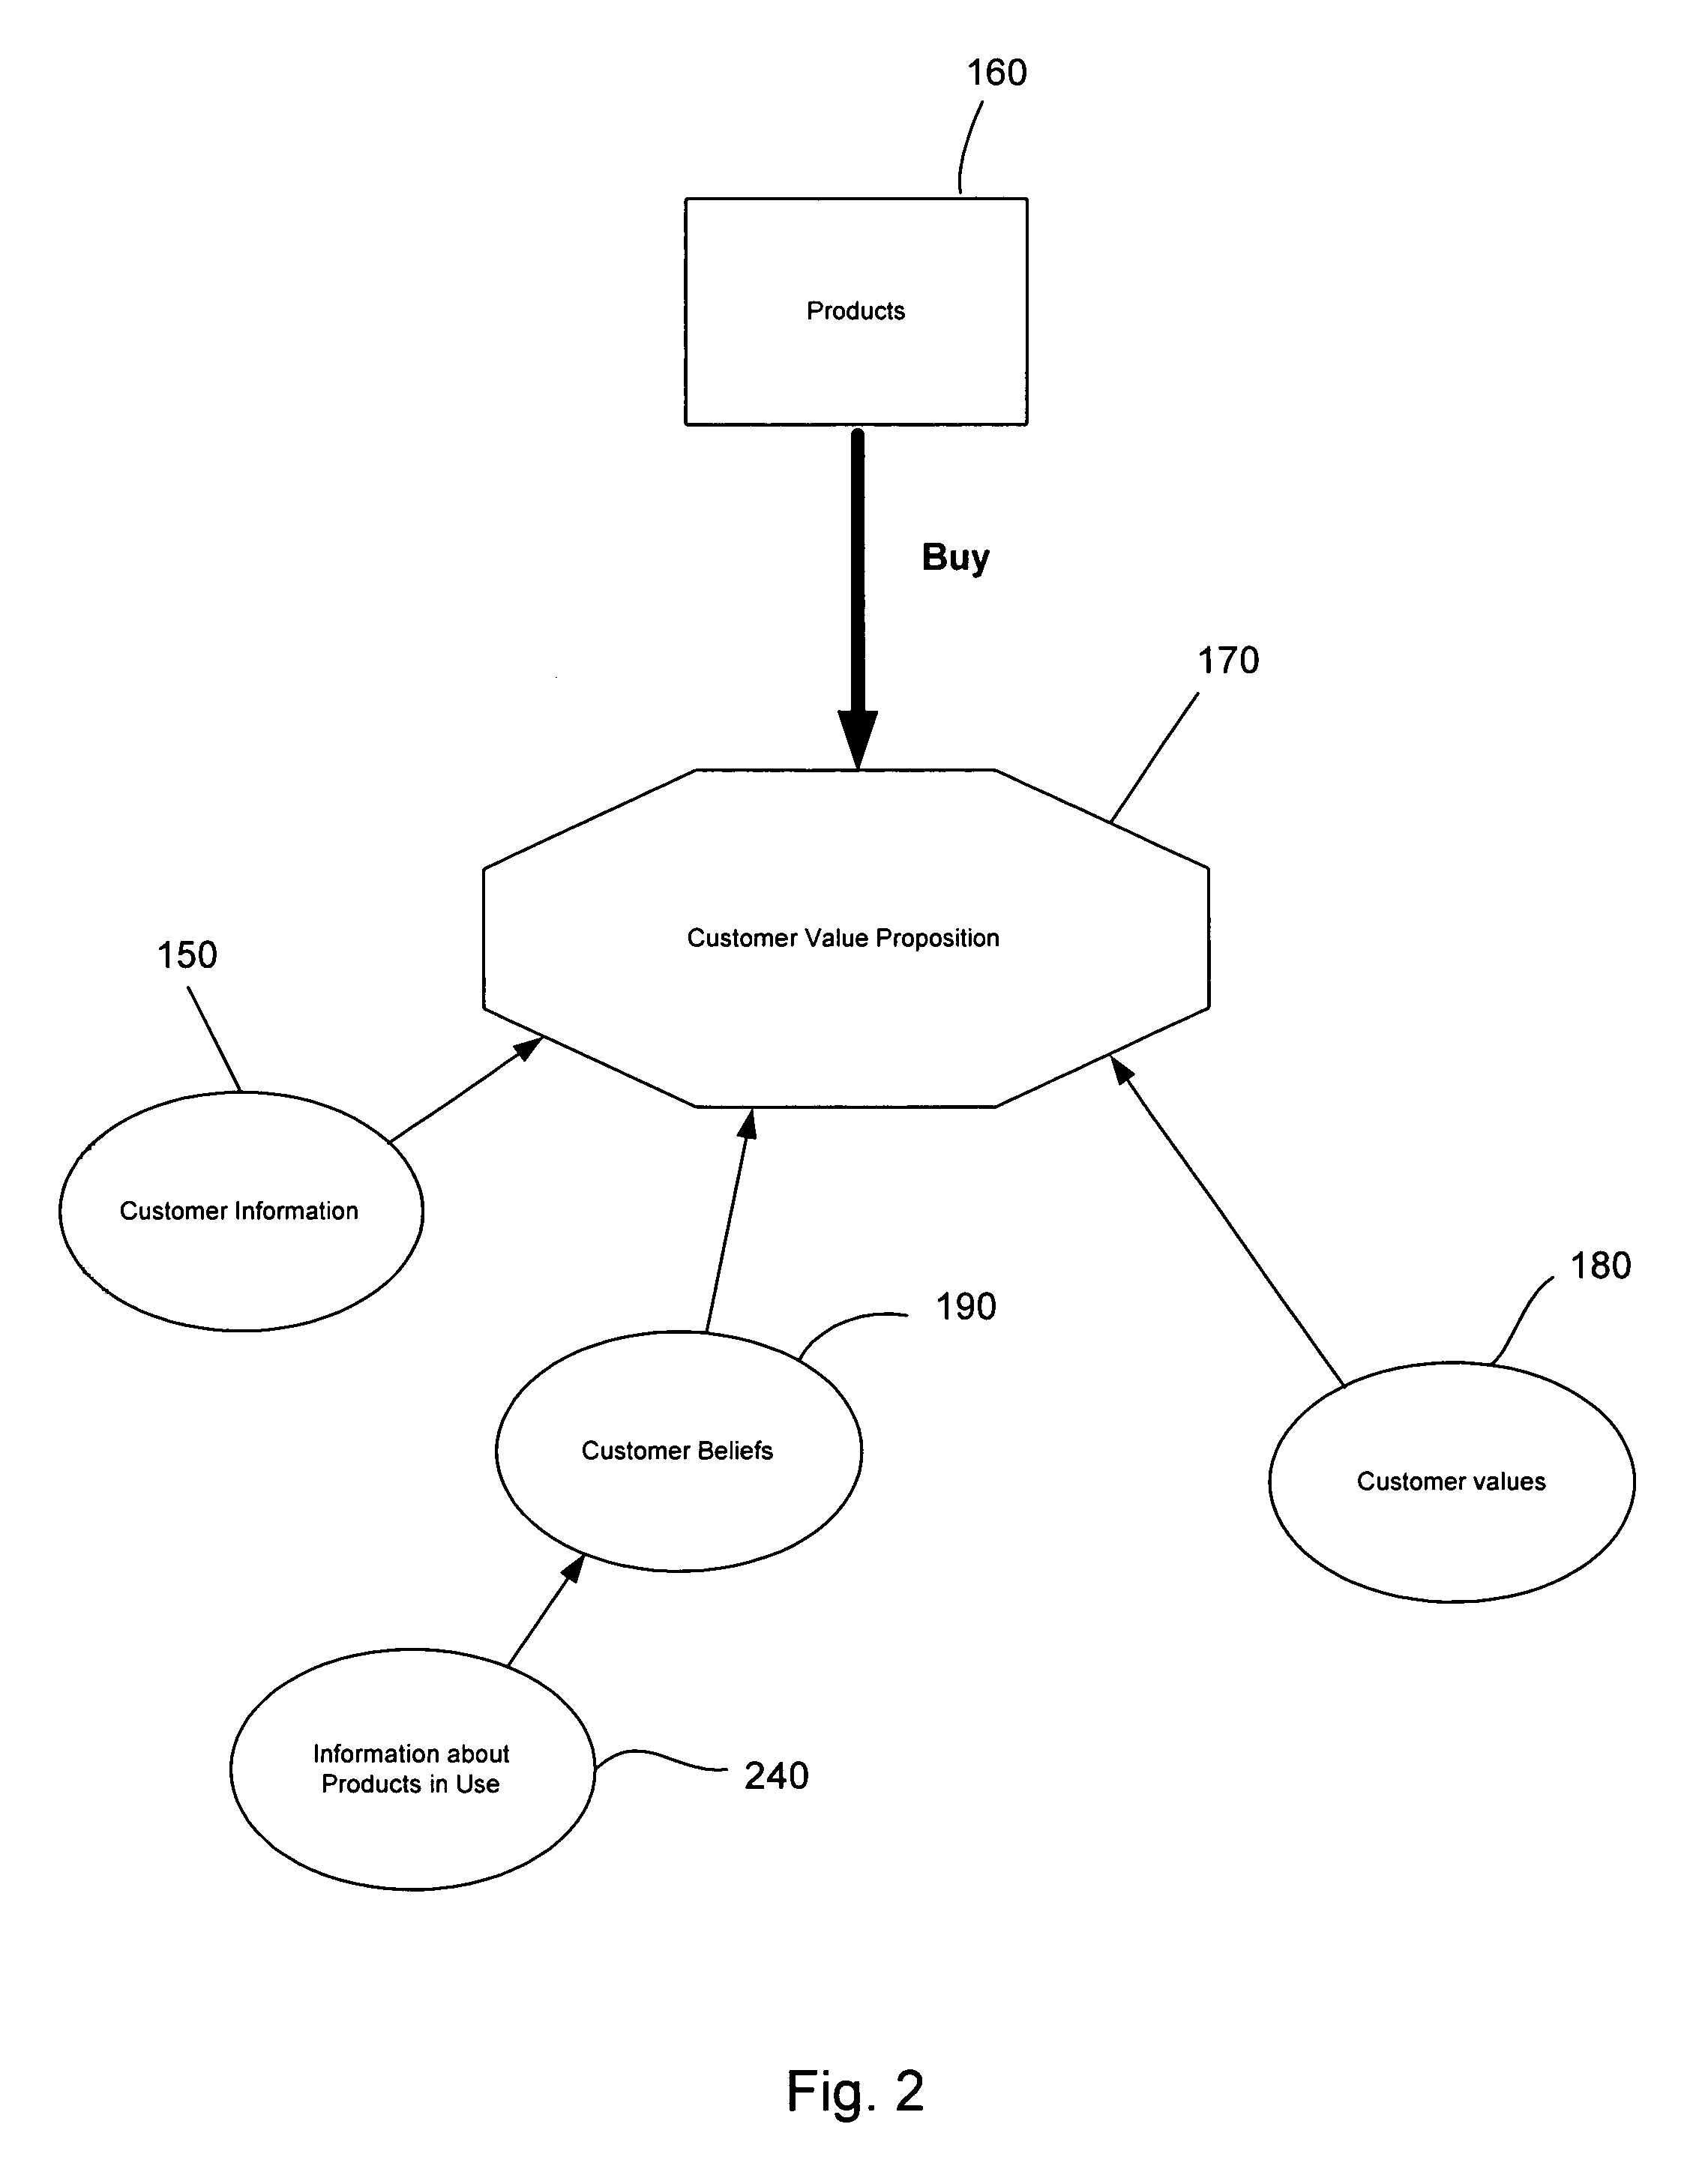 Value driven integrated build-to-buy decision analysis system and method